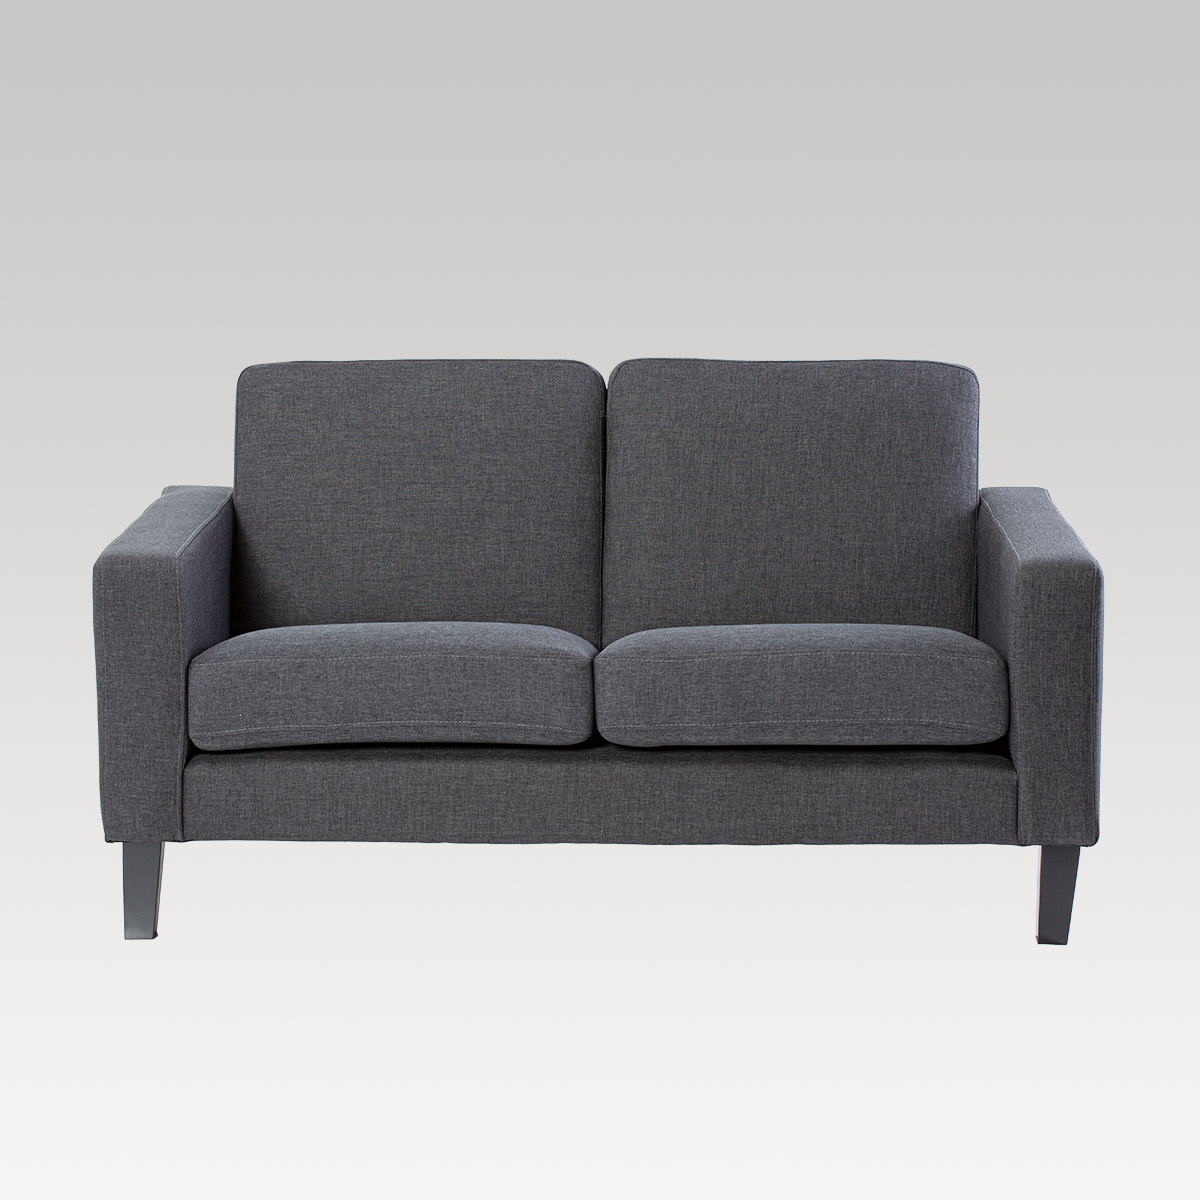 Image of Makers Fenix Fabric 3 Seater Sofa - Charcoal